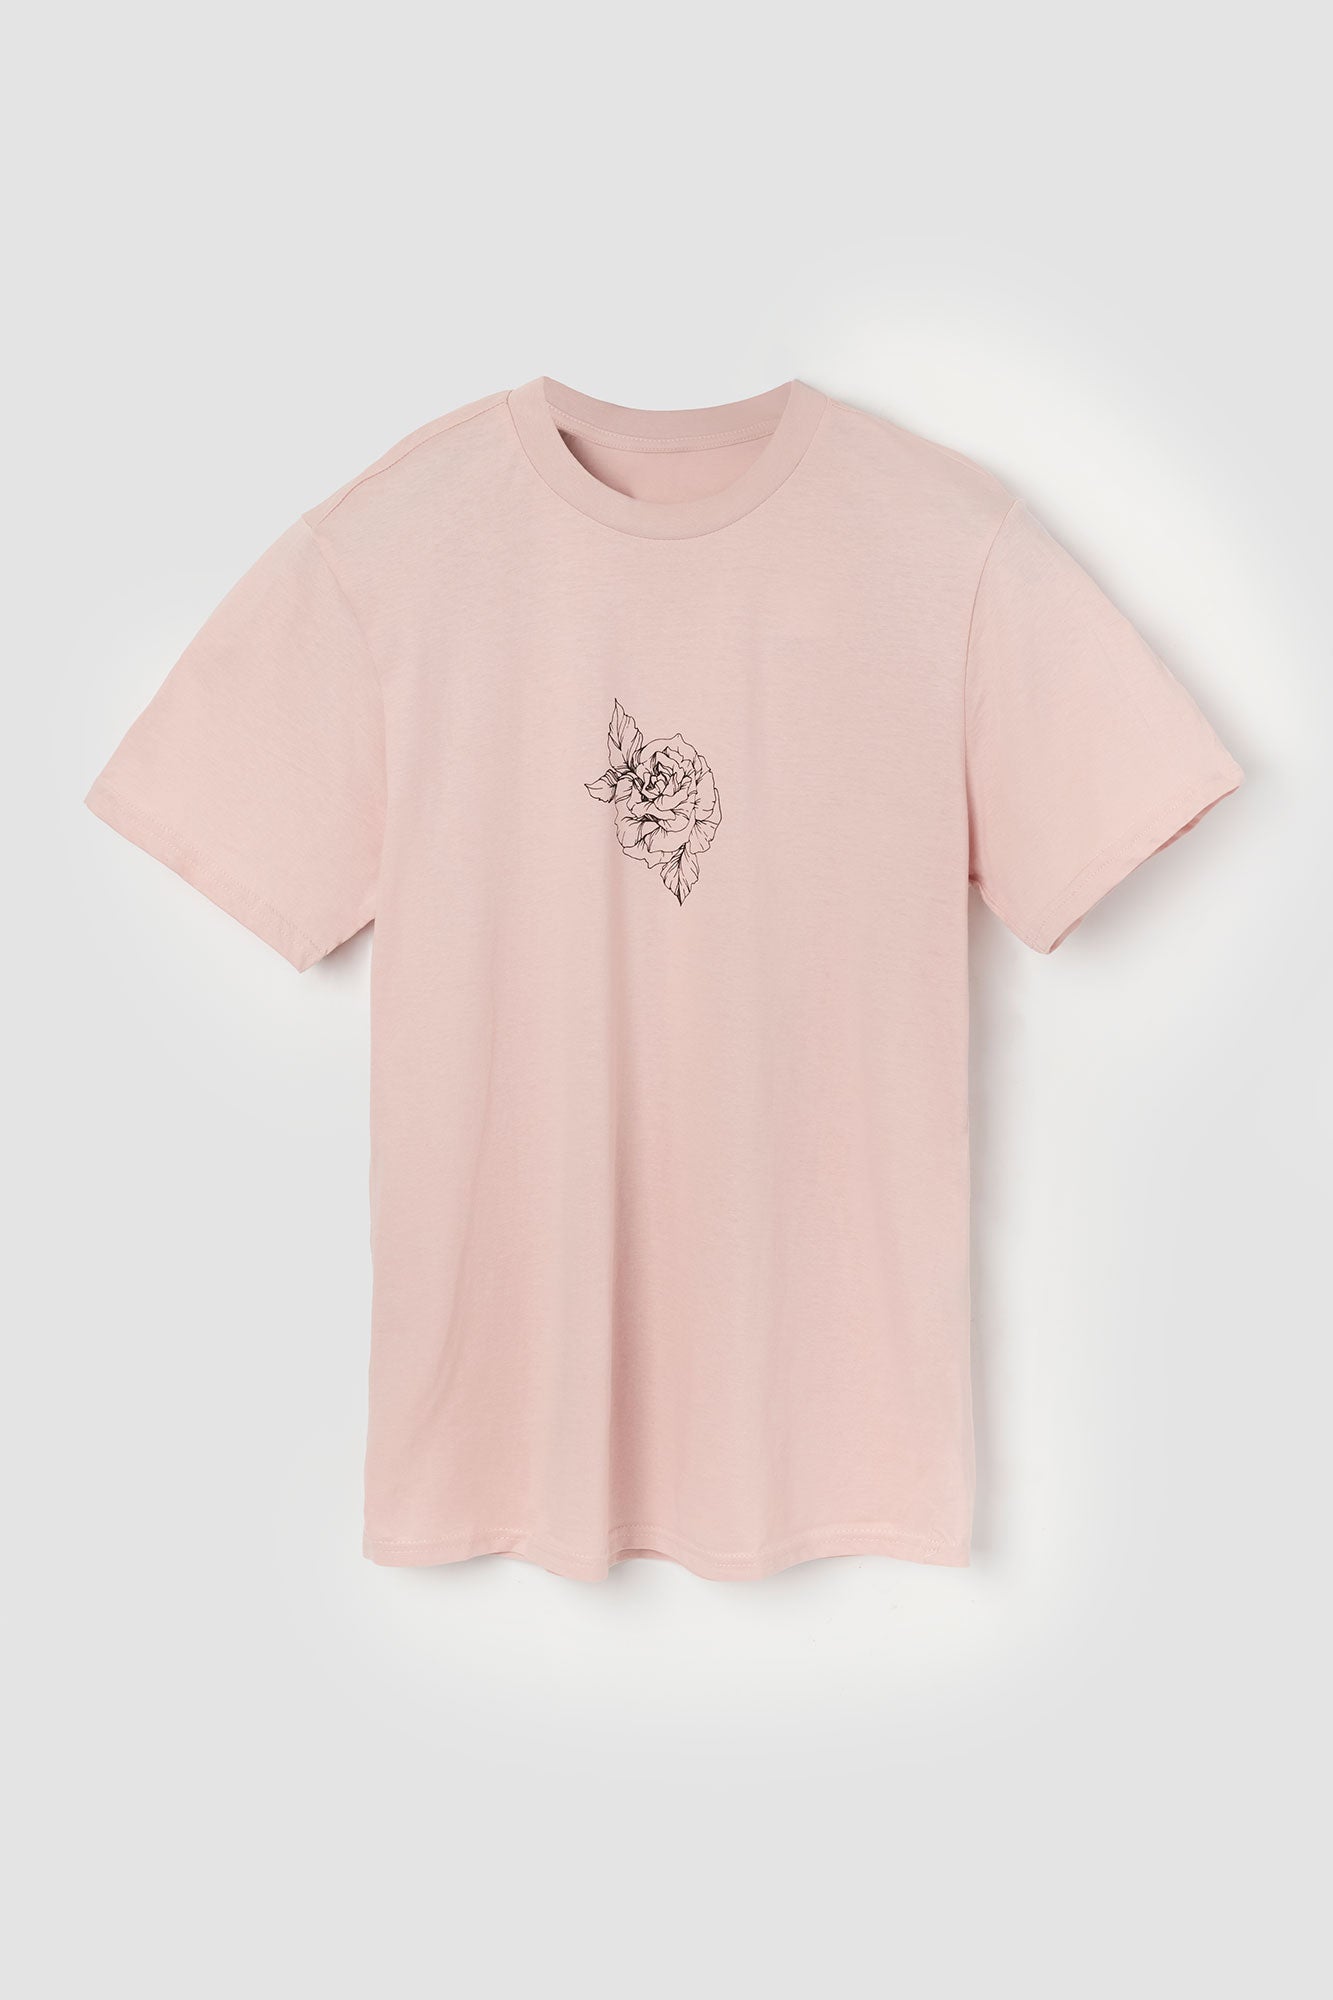 Floral Heart Graphic T-Shirt